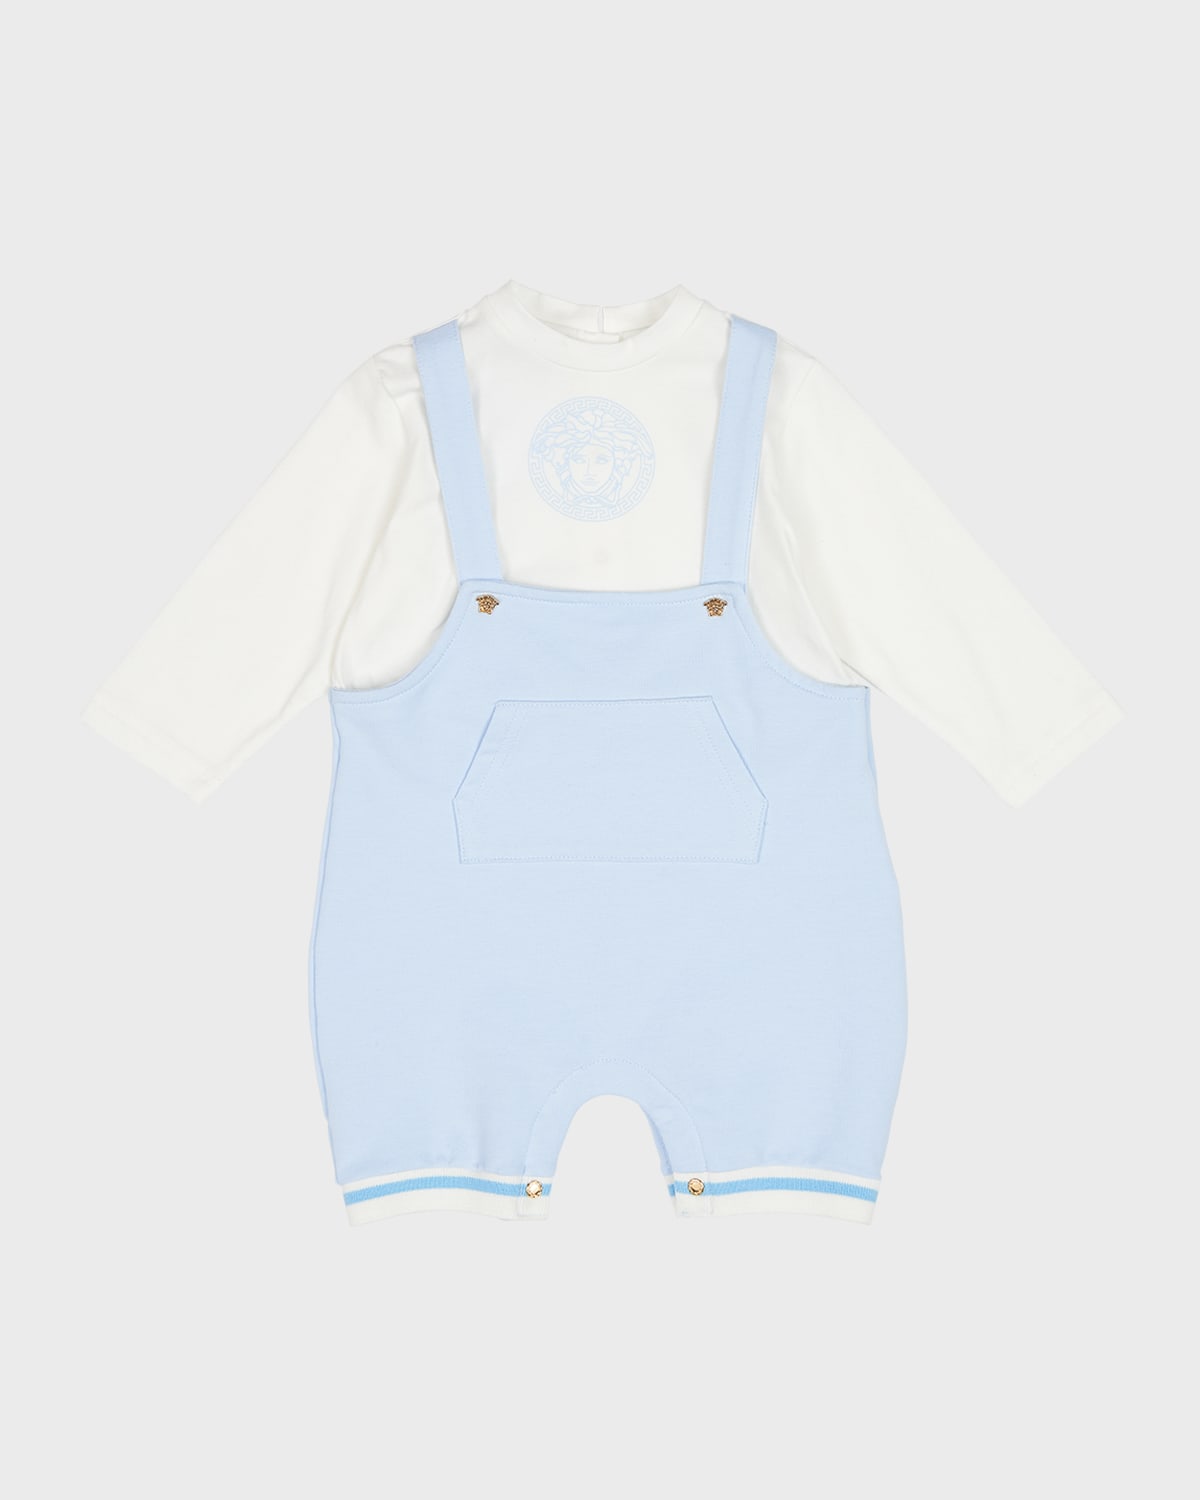 Boy's Fleece All In One Overalls, Size 3M-12M